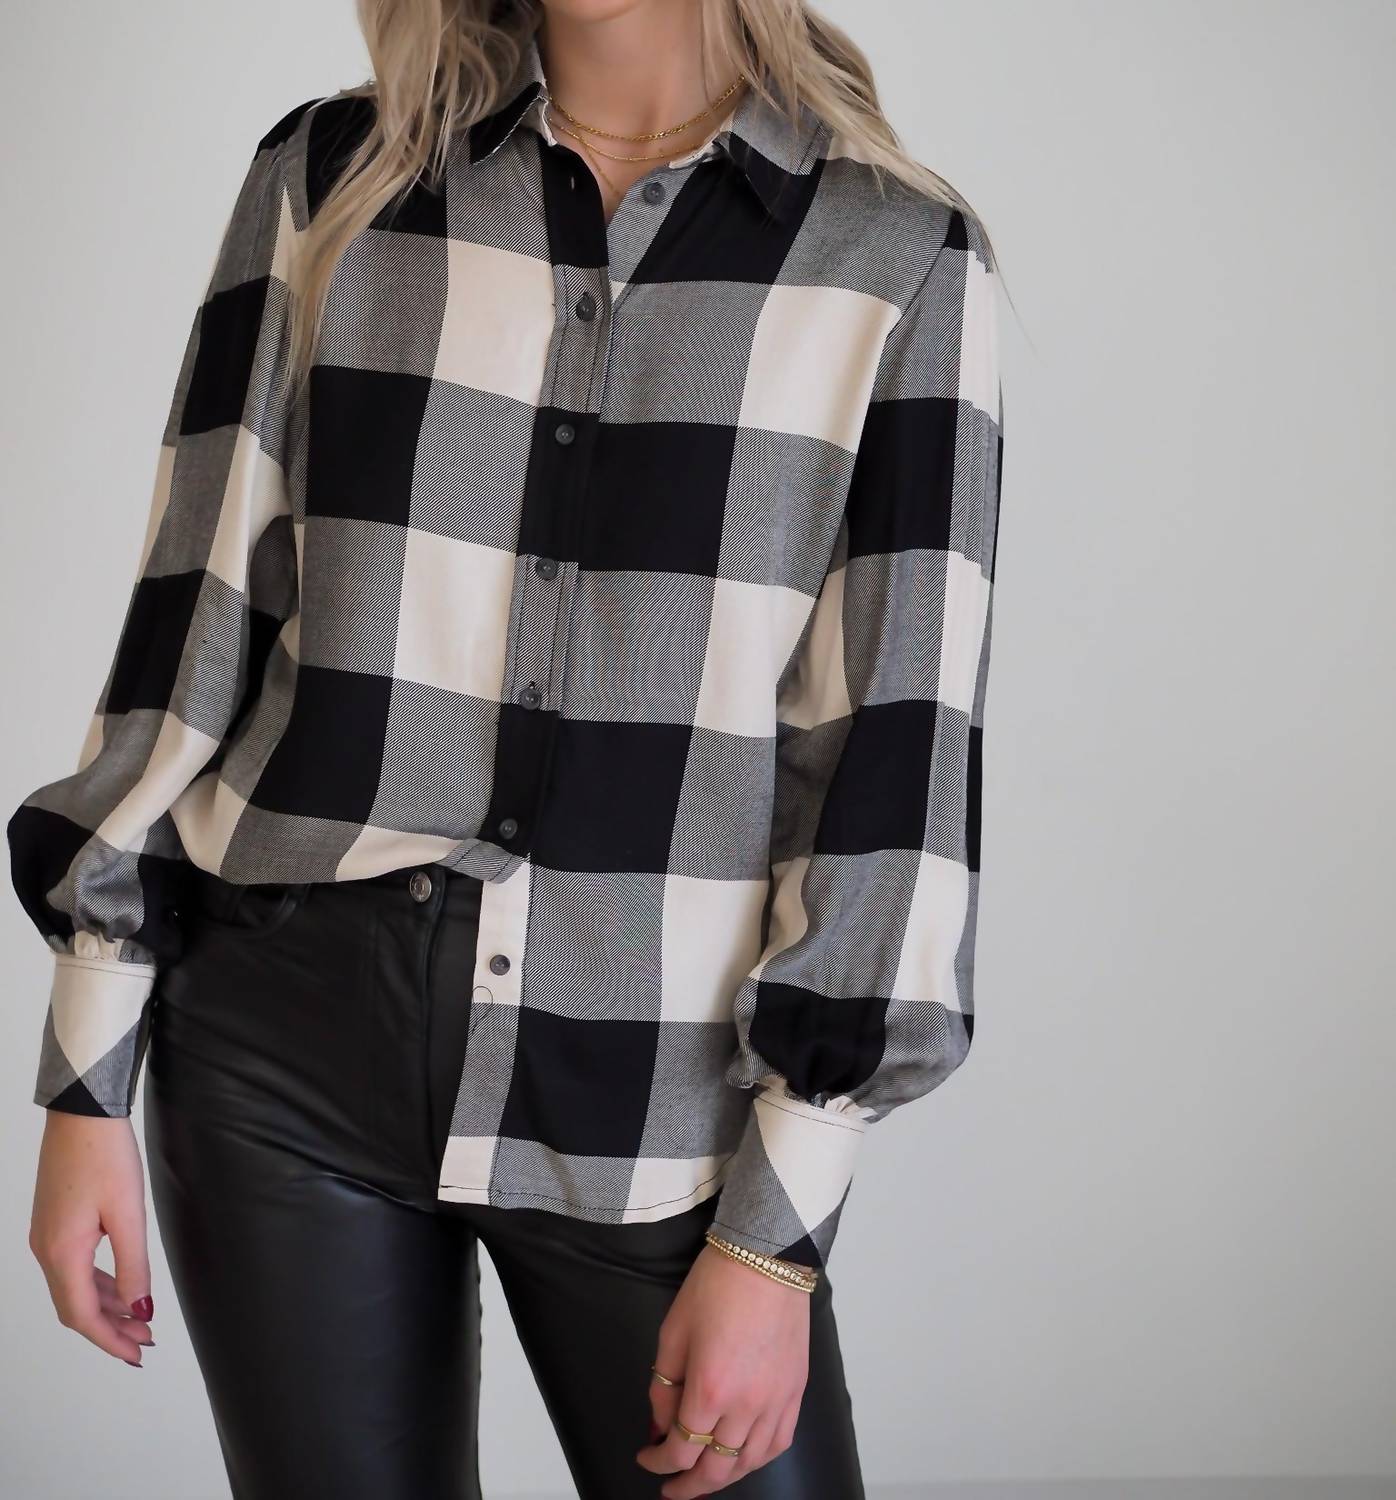 SANCTUARY Full Sleeve Plaid Shirt in Toasted Marshmellow Check